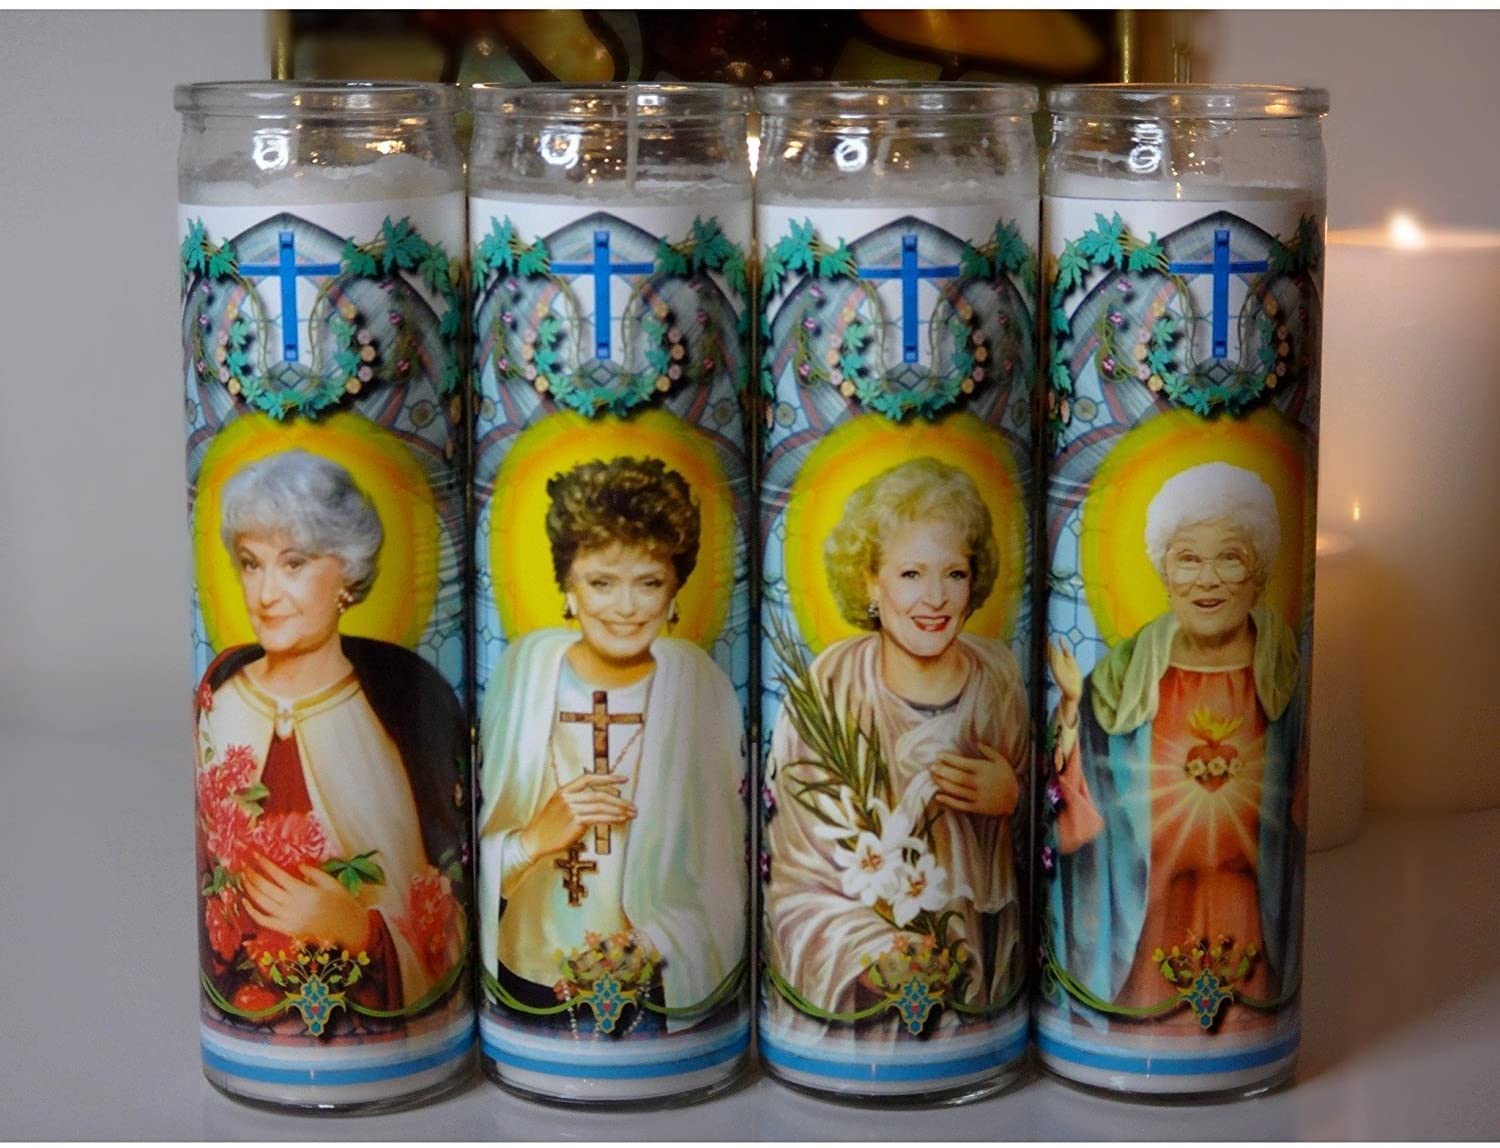 My Pen15 Club Set of 4 Golden Girls Celebrity Prayer Candles - Blanche Rose Dorothy and Sophia